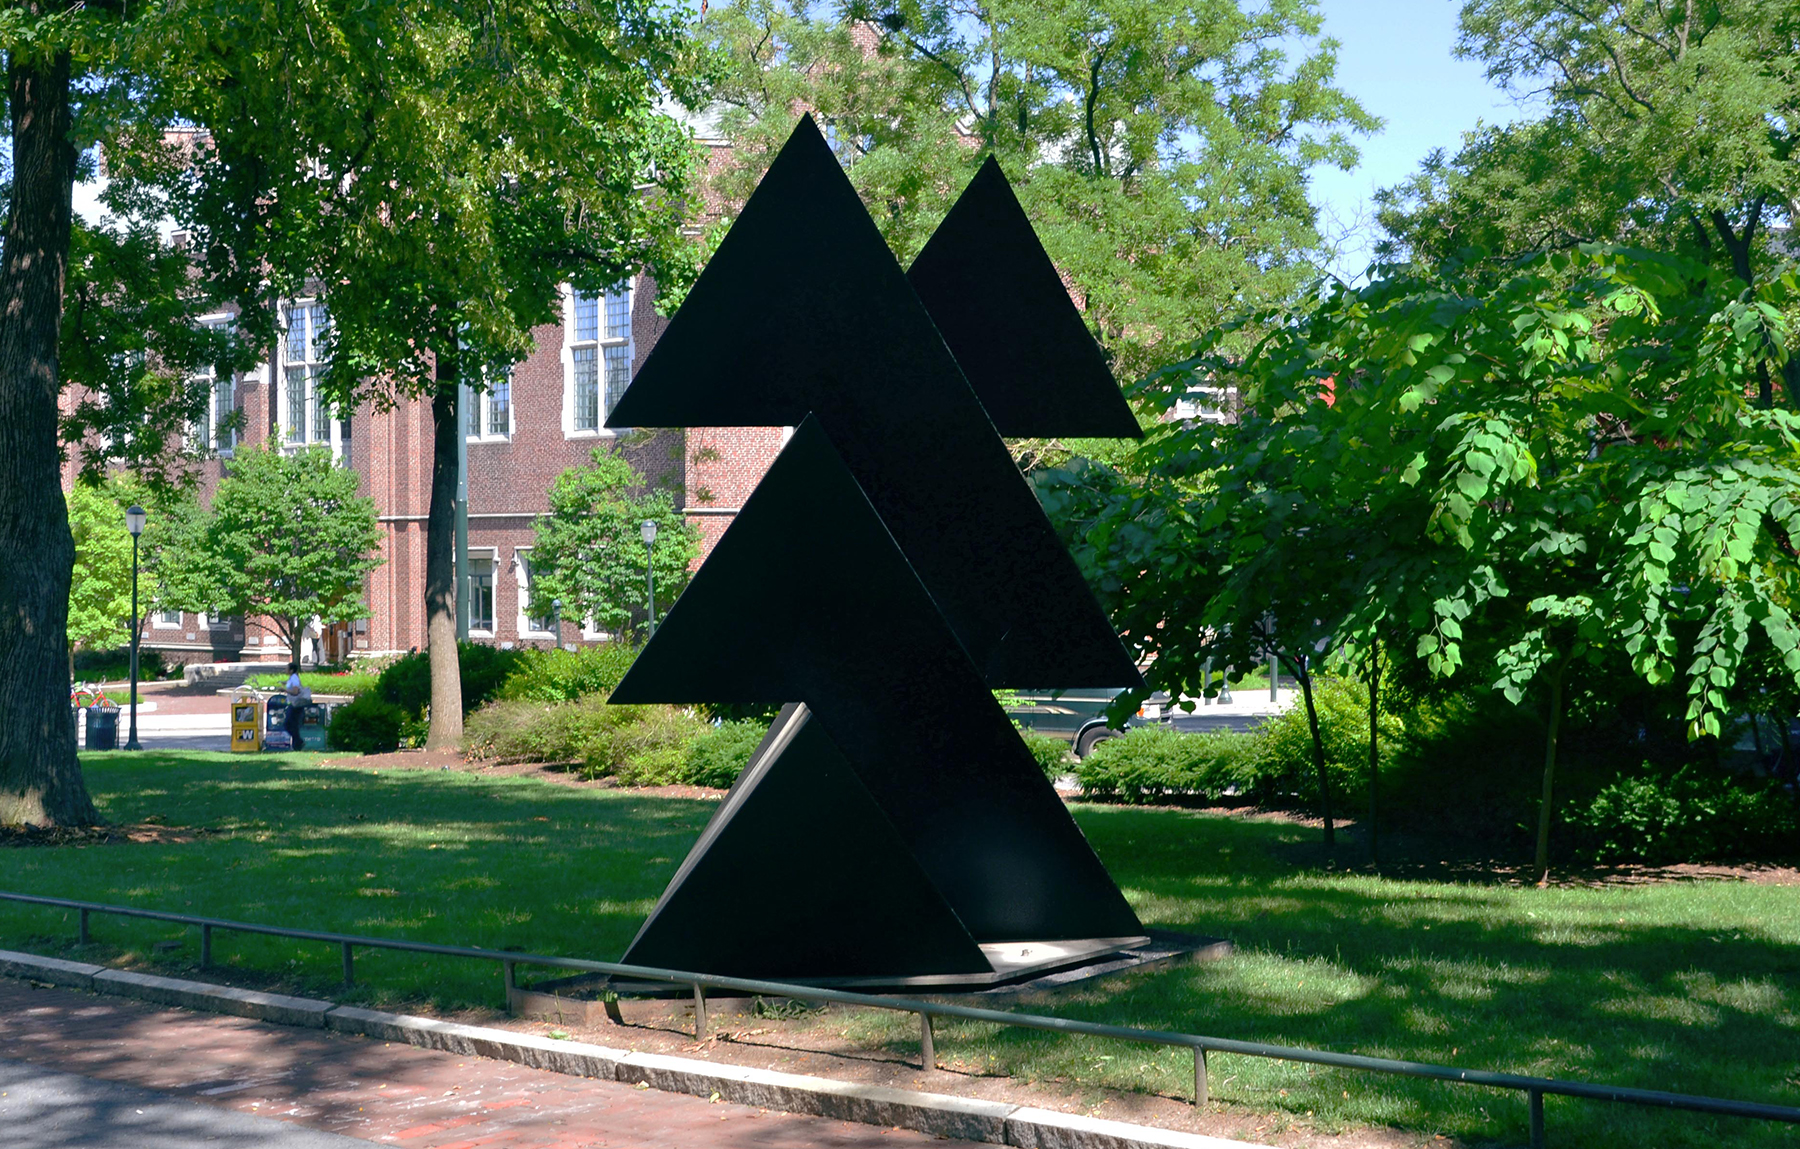 Black painted steel geometric sculpture, angular forms, on University of Pennsylvania campus in grass